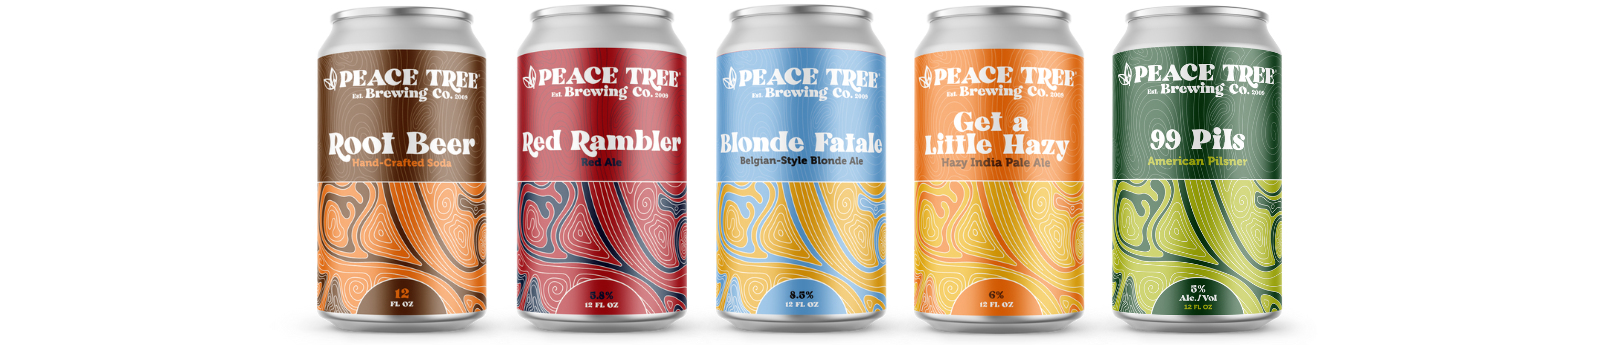 Peace Tree Beer Can Lineup Core Brands